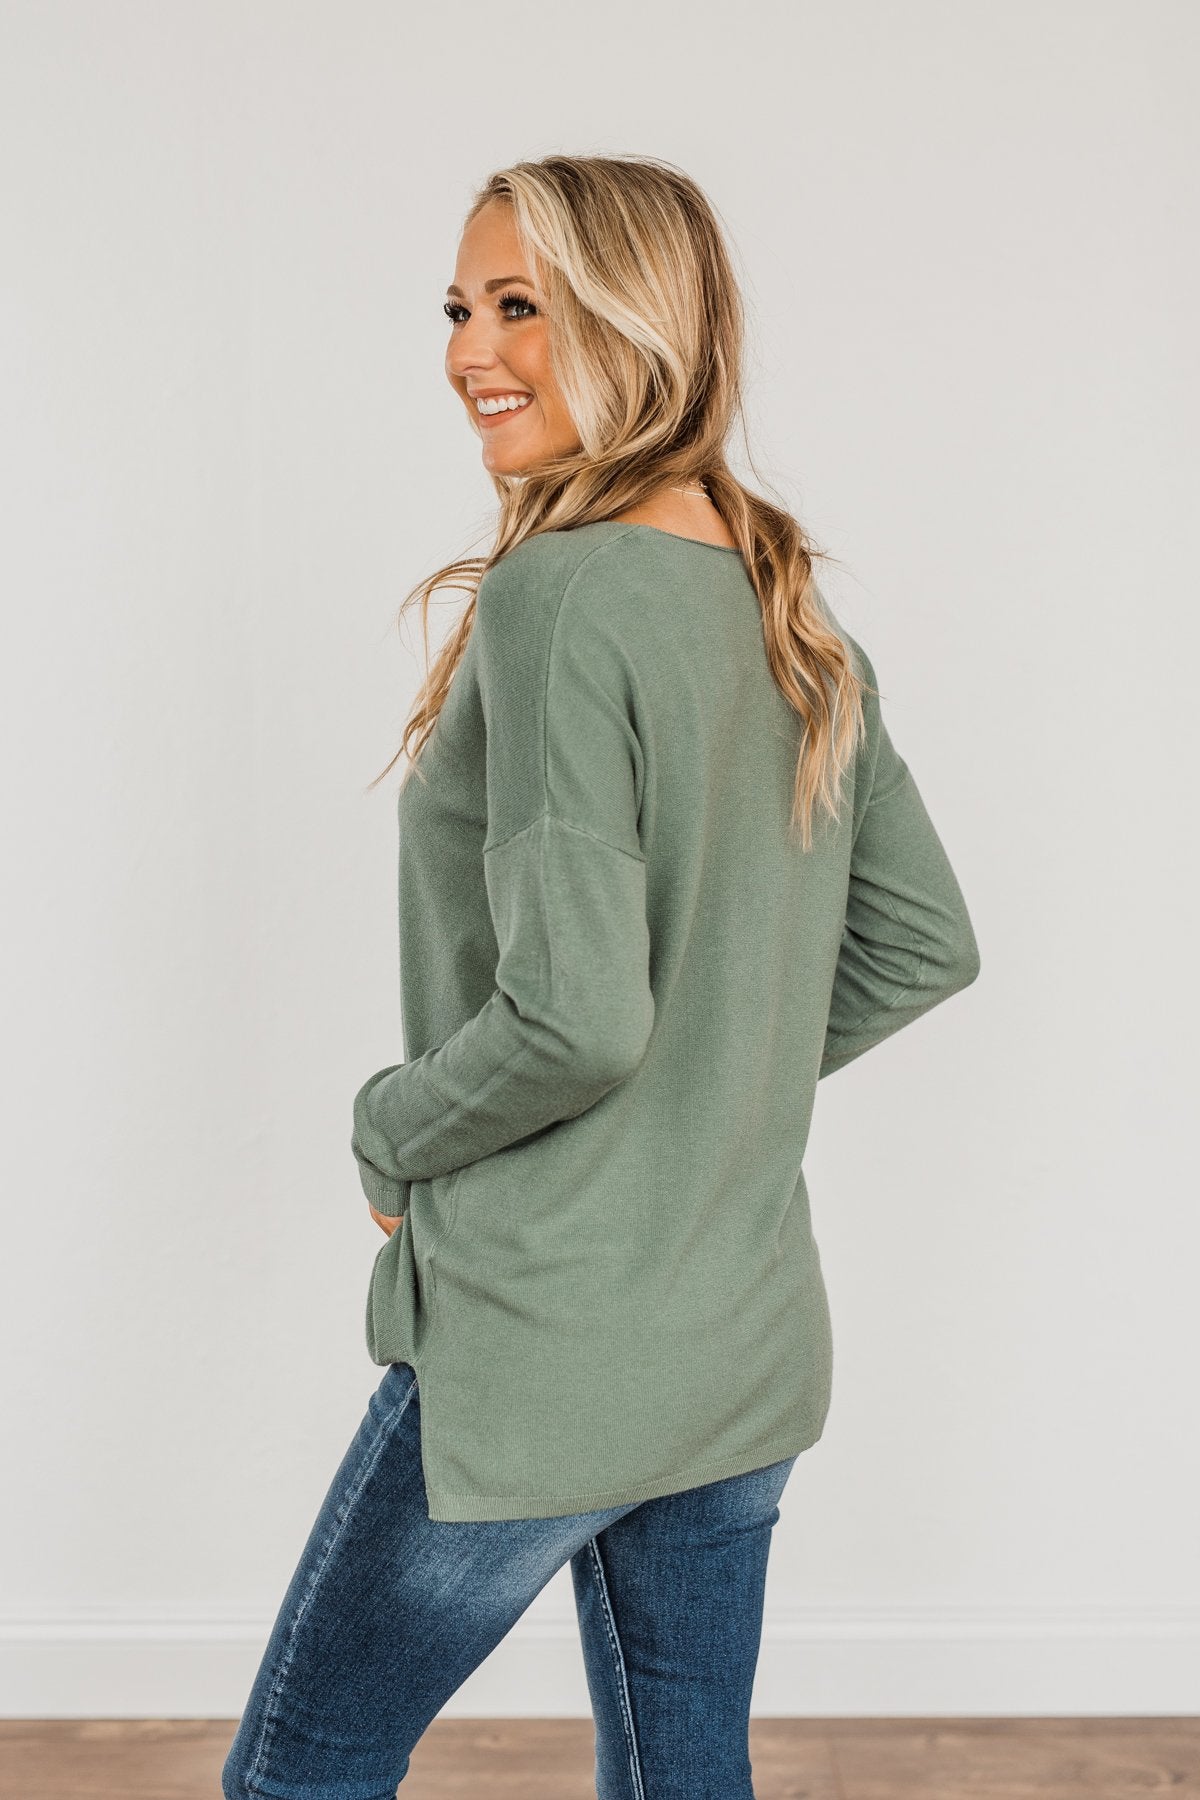 The Best Part V-Neck Sweater- Dusty Jade